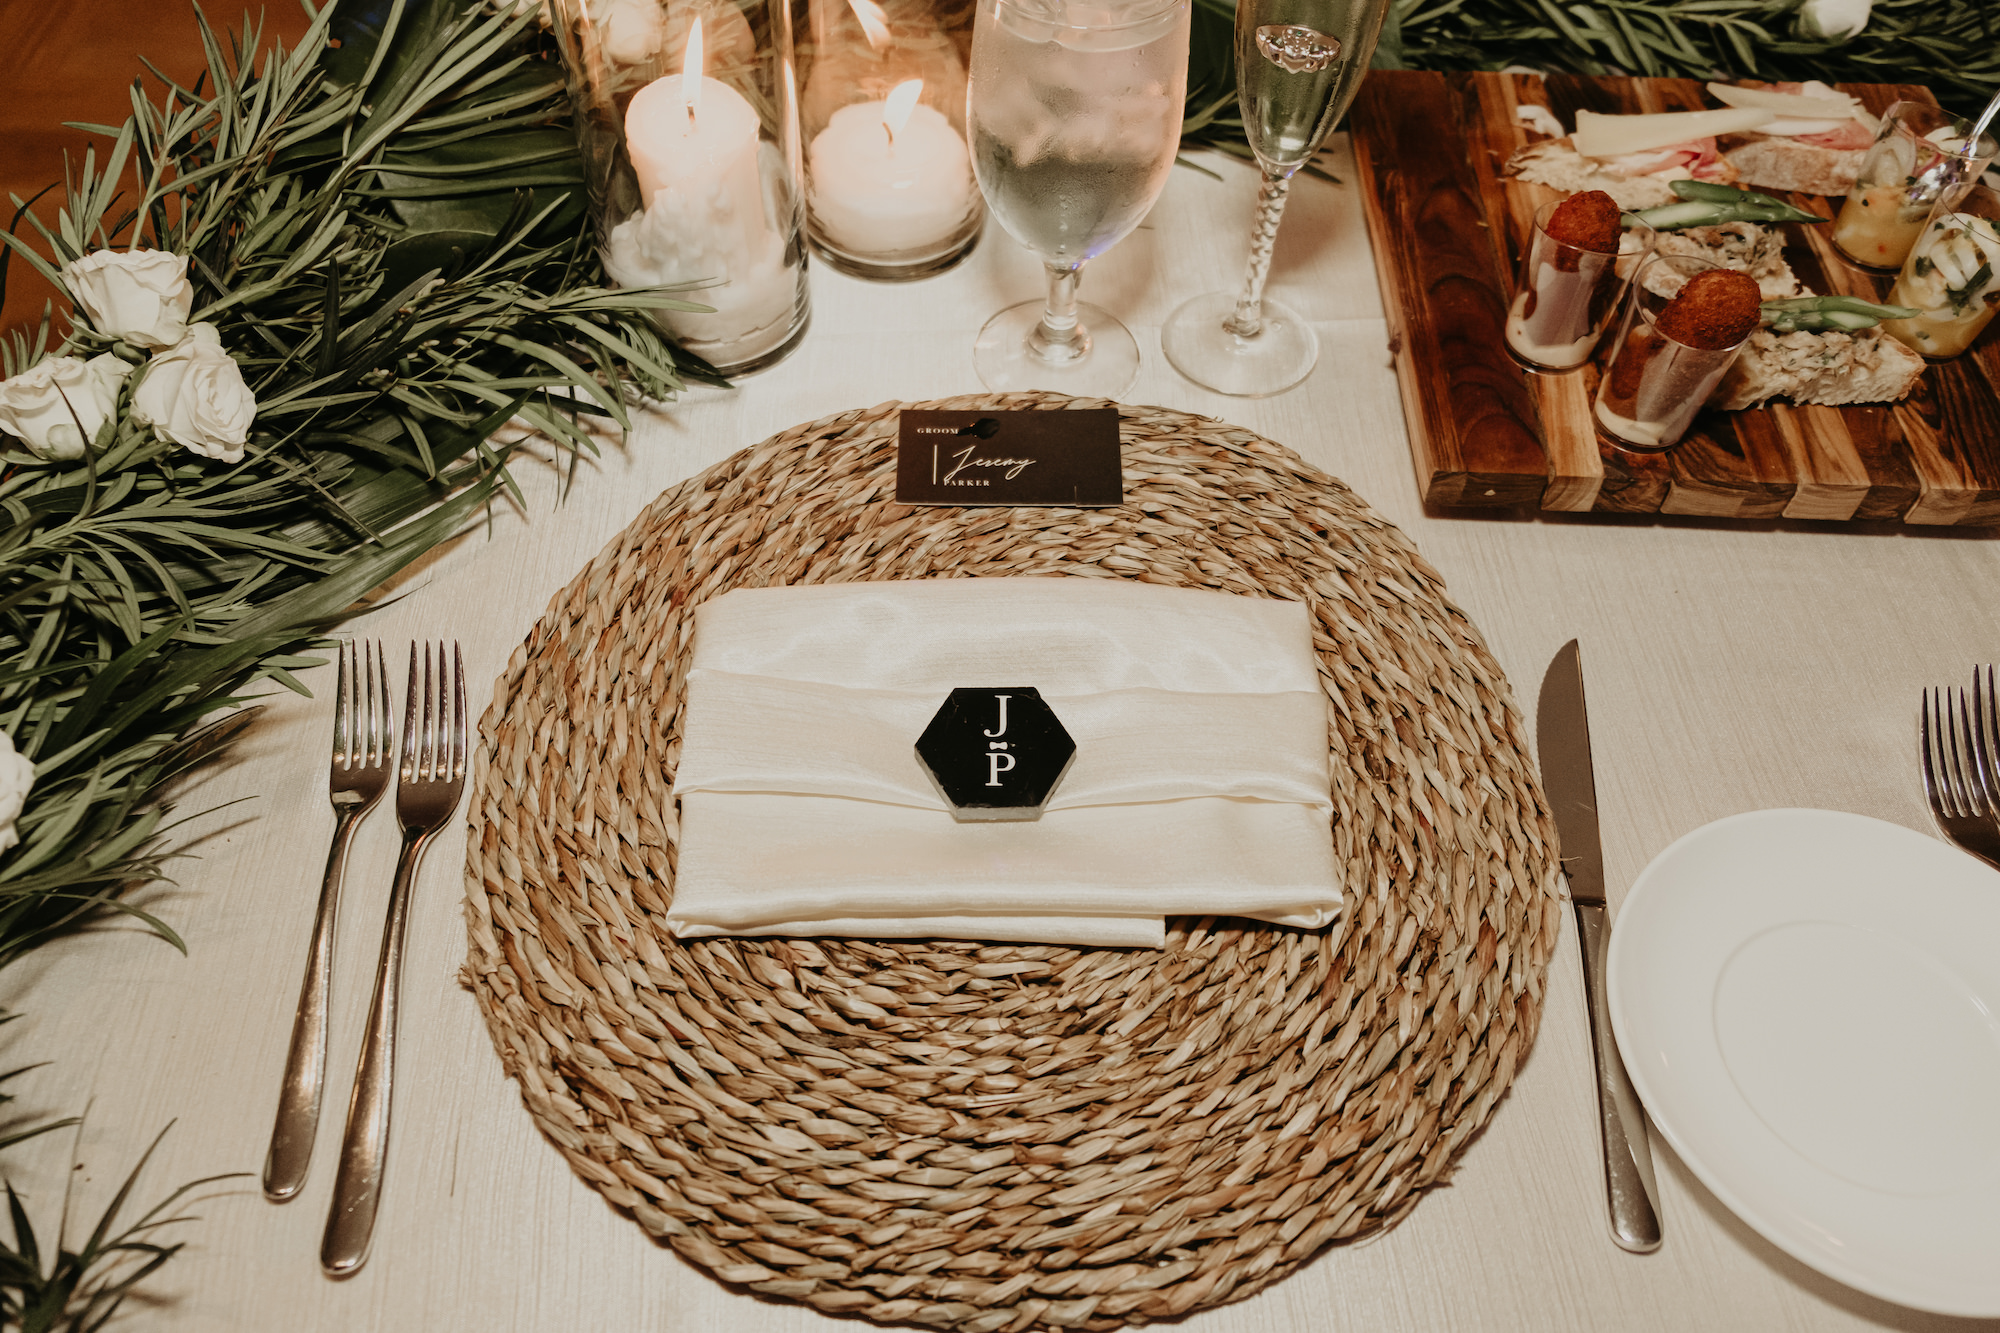 Water Hyacinth Wedding Reception Charger with Personalized Napkin Ring and Gold Flatware | Boho Natural Wedding Decor Ideas